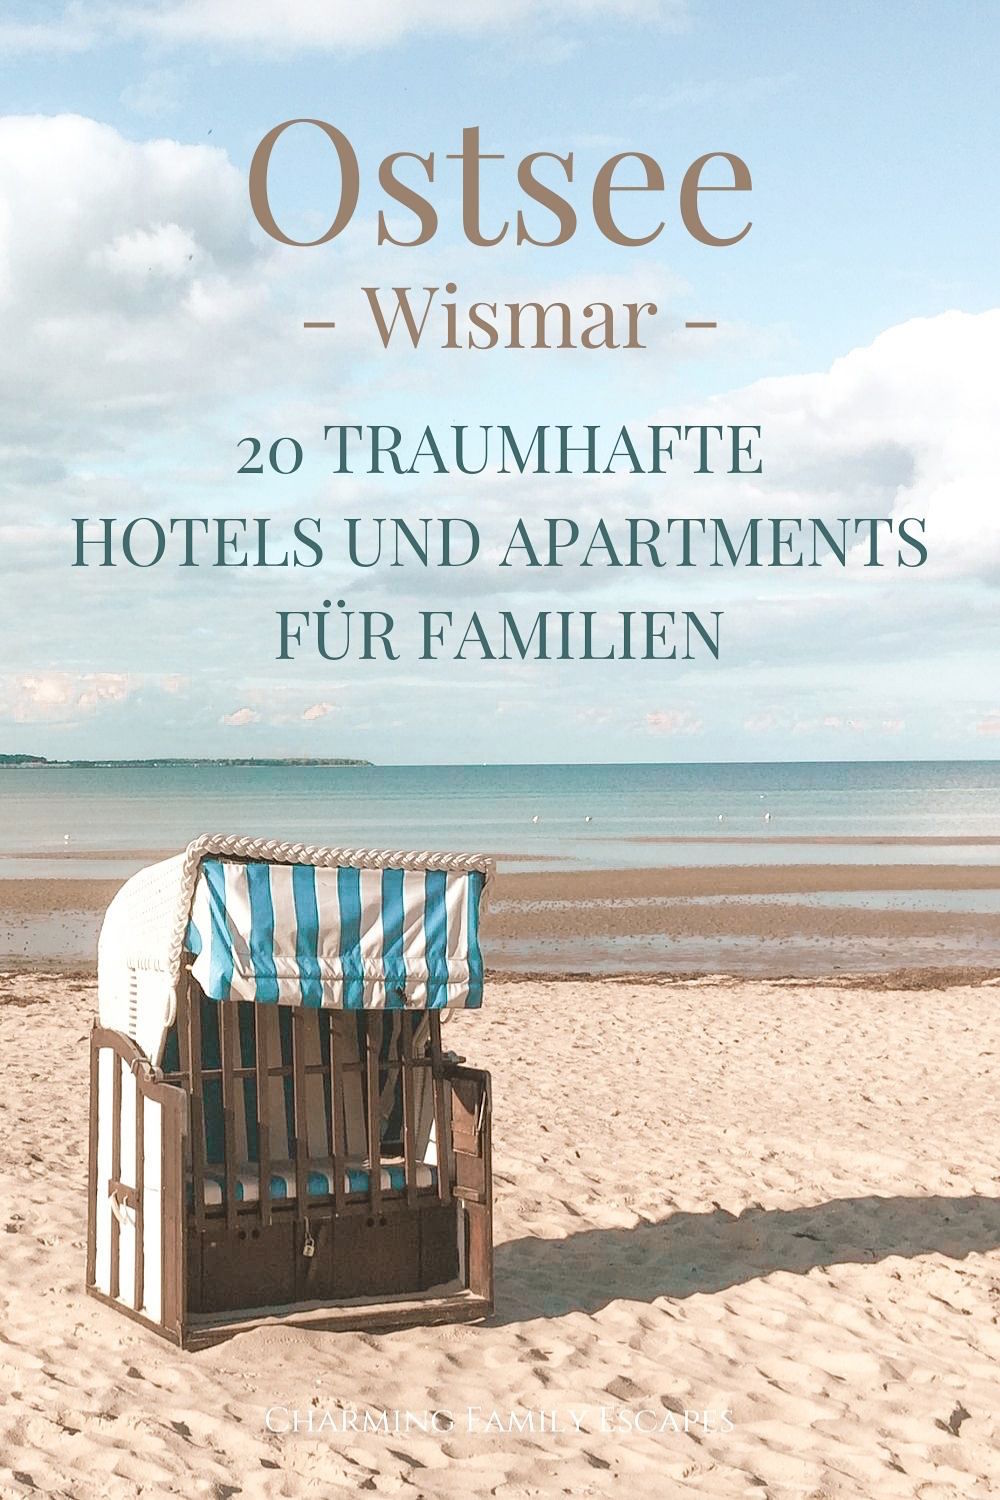 Holidays on the Baltic Sea - 20 fantastic hotels and apartments for families in Wismar